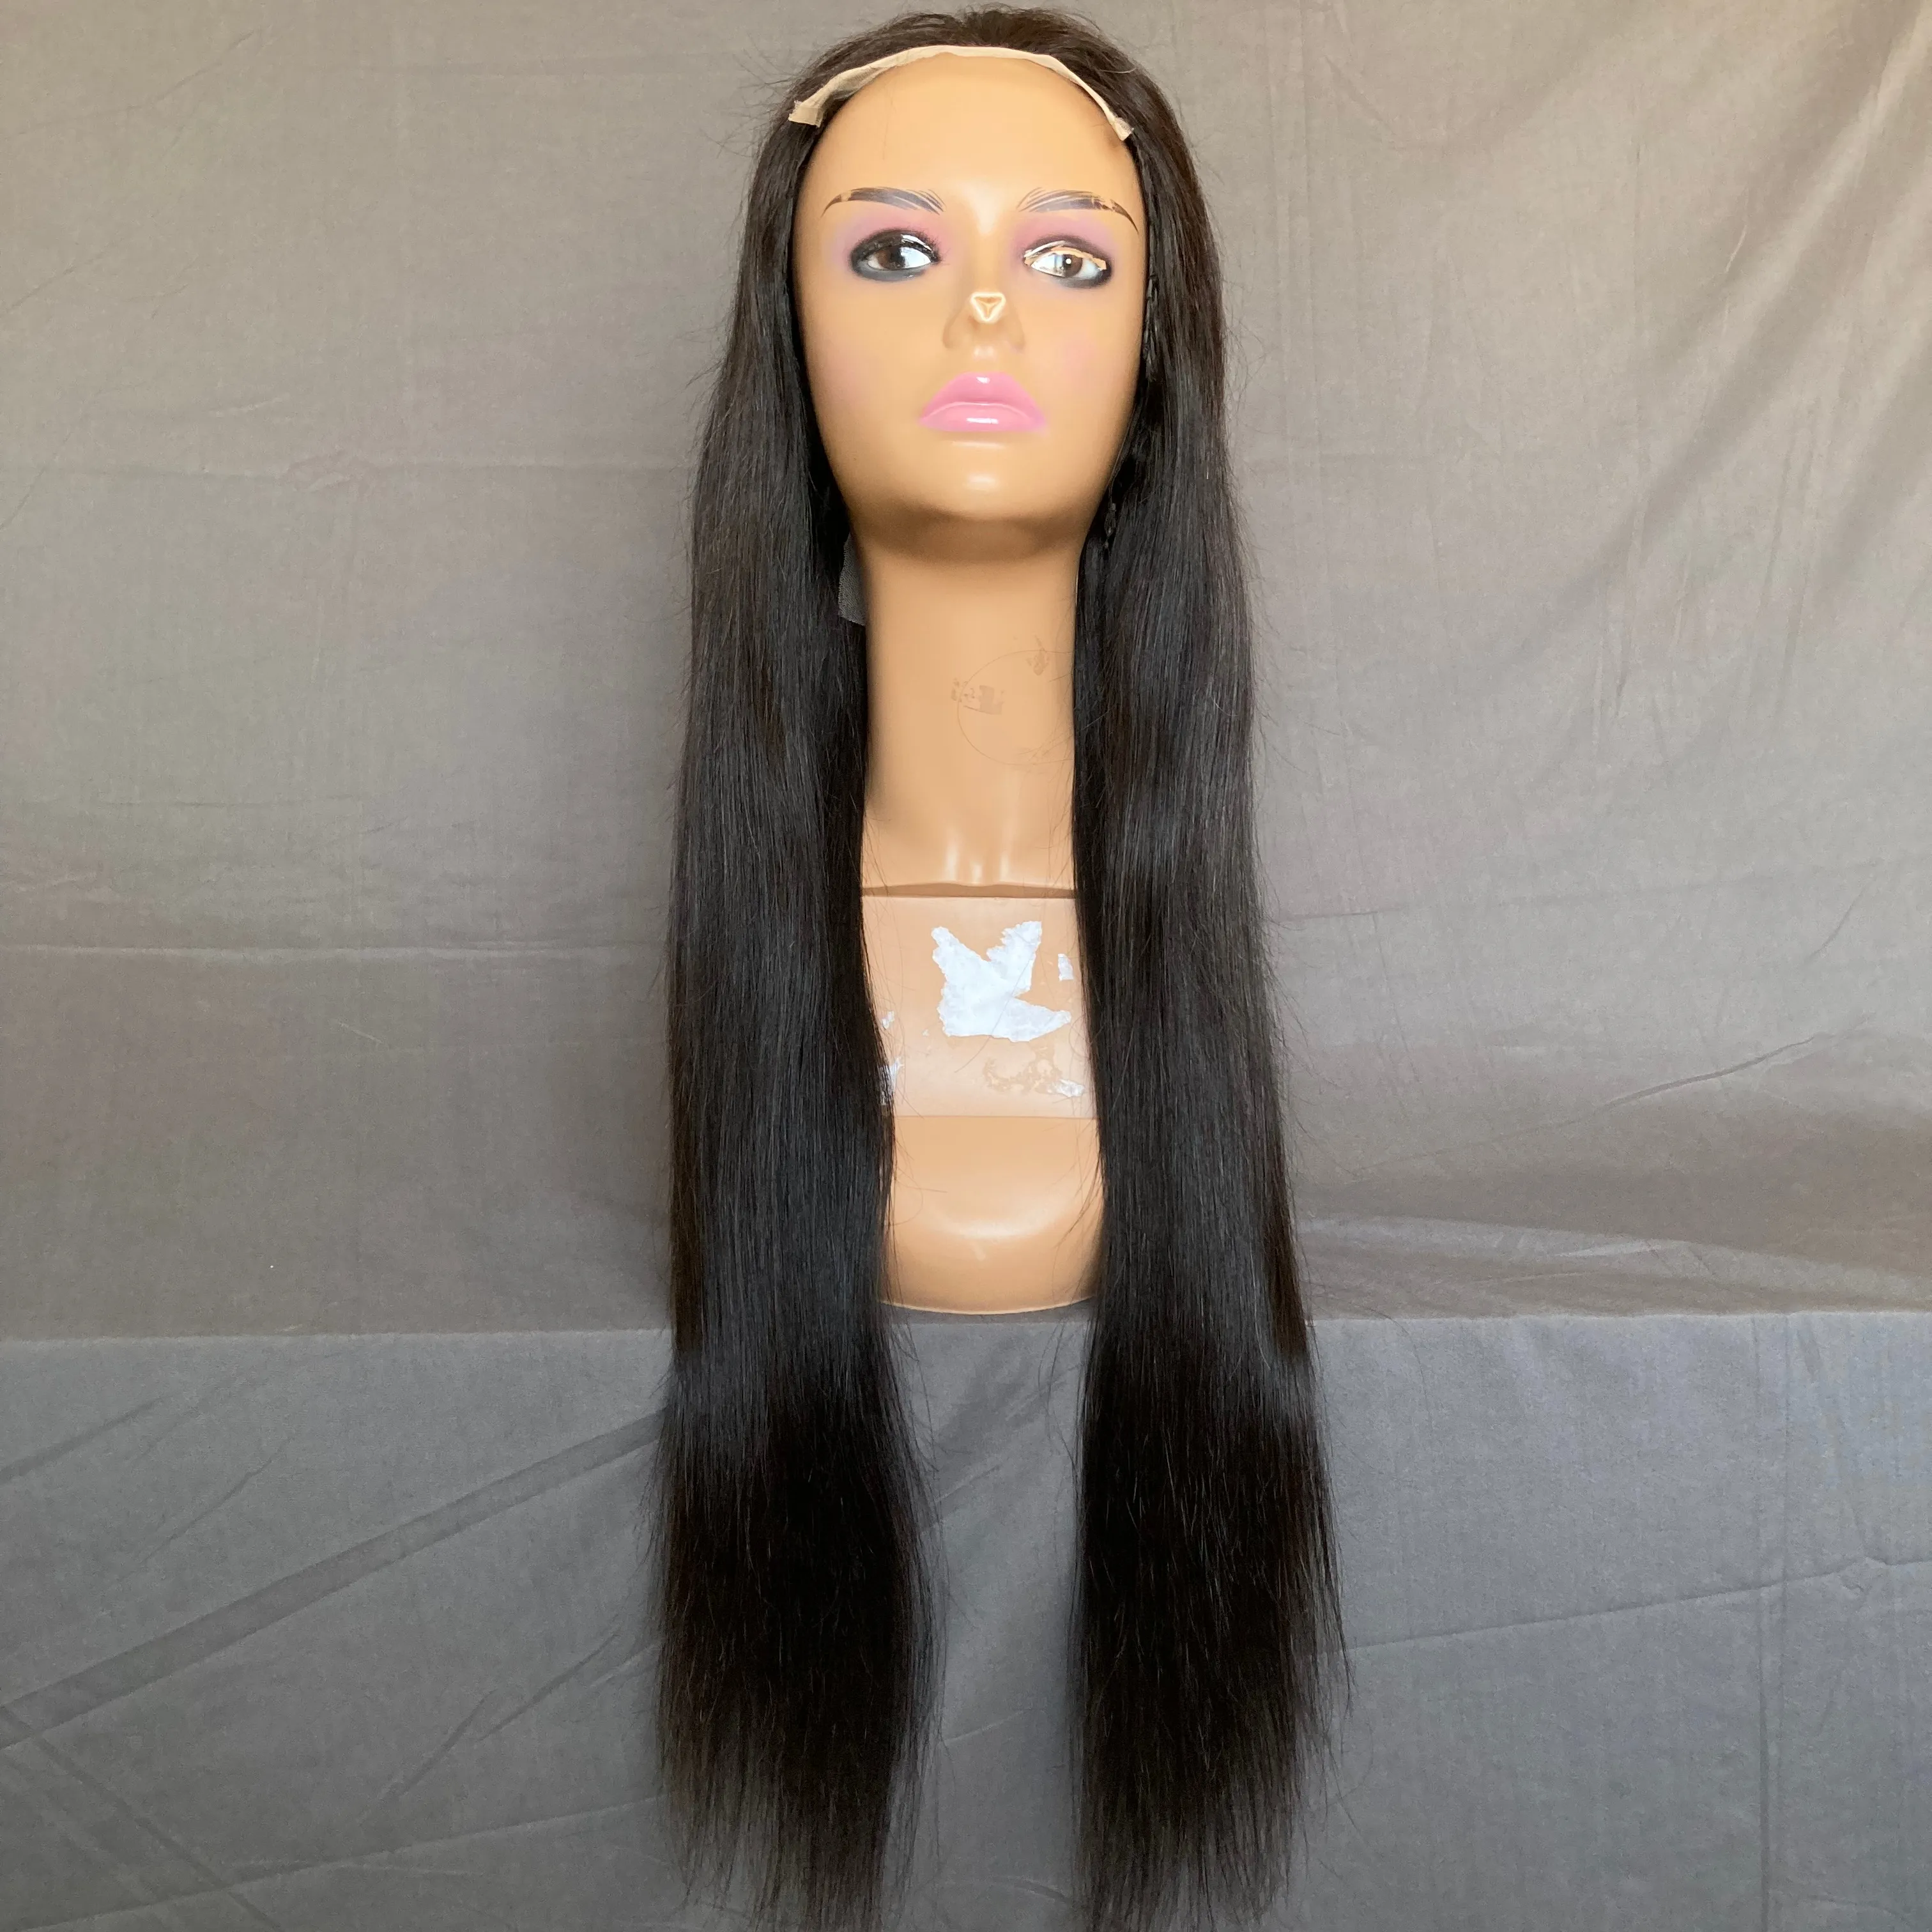 5x5 closure wig transparent lace 11a high quality ,100% human hair can be dyed easy to bleach , true to length no tangle no shed